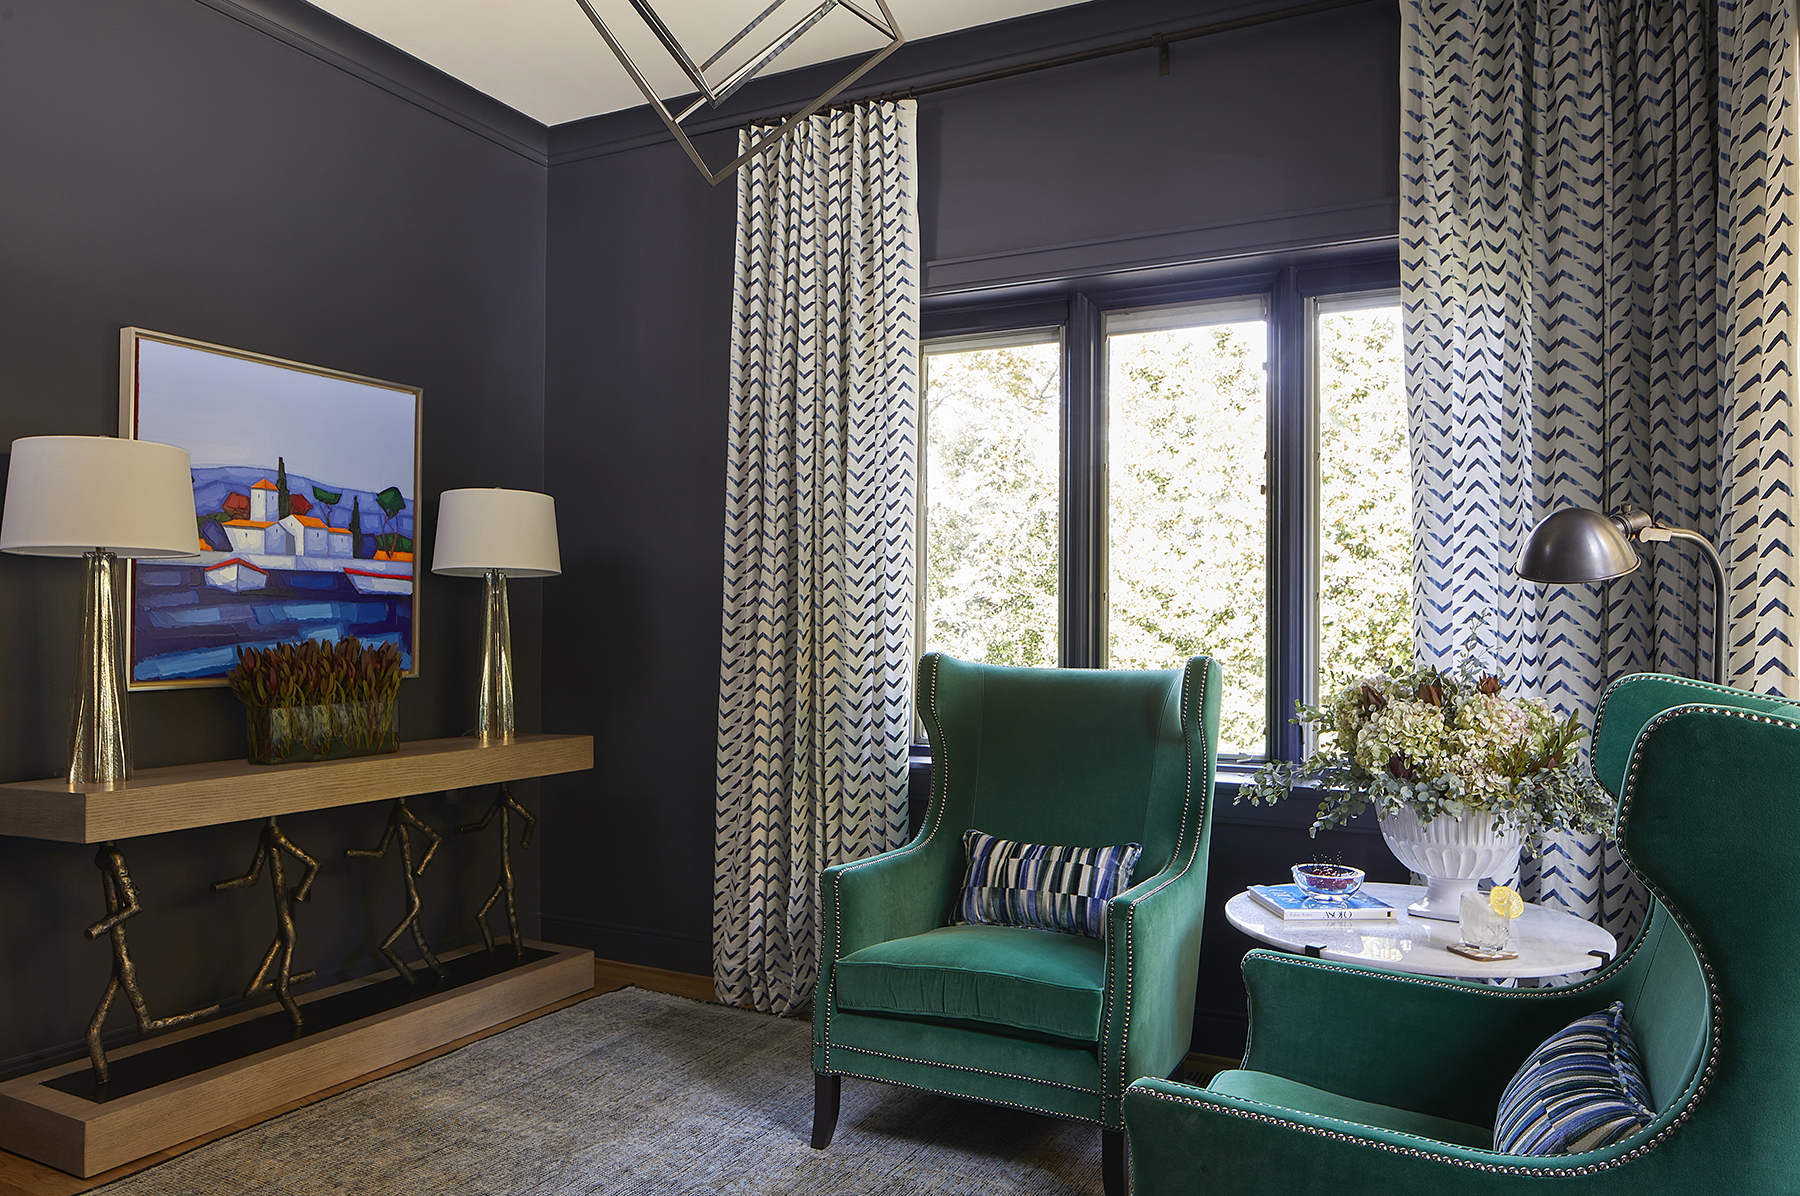 Dark walls in the sitting room let the brighter colors of the furniture and art pop.